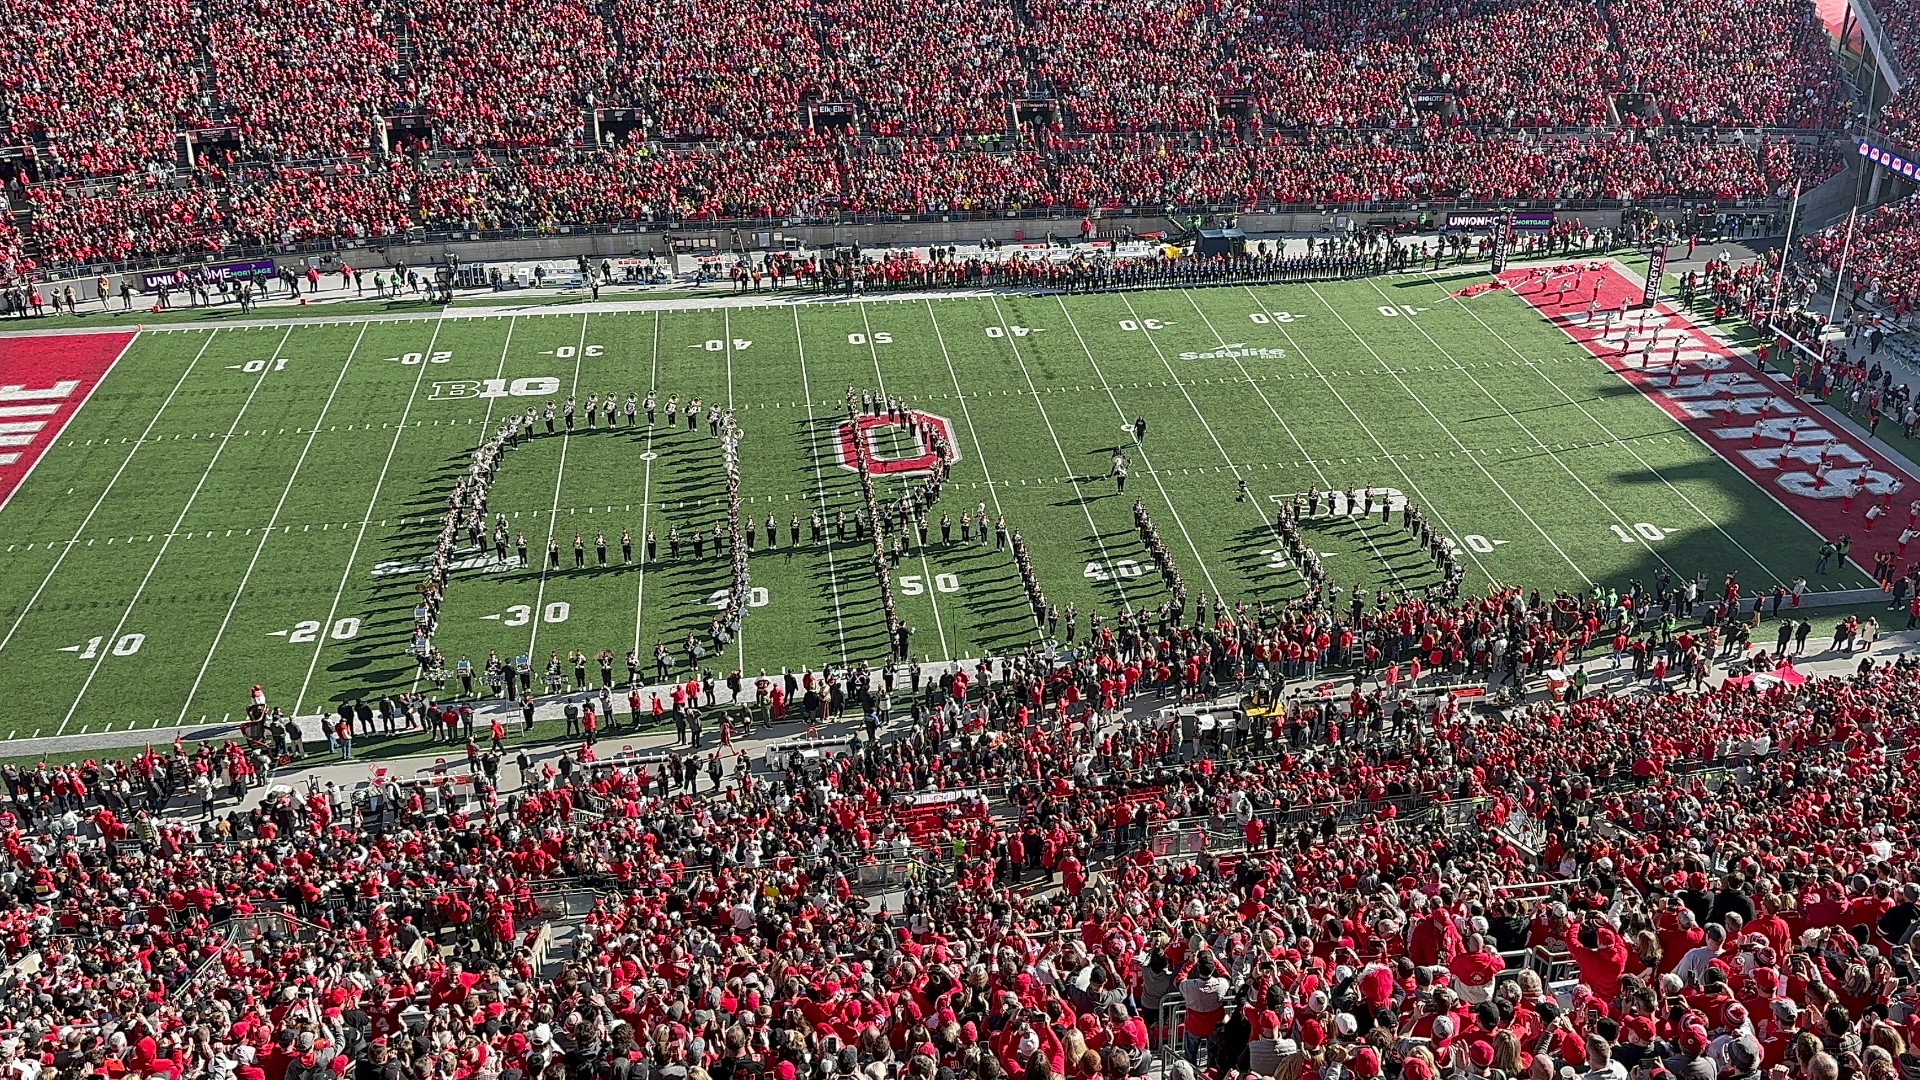 The Best Damn Band In The Land performs "Script Ohio" before the Ohio State-Michigan game on Saturday, Nov. 26, 2022.